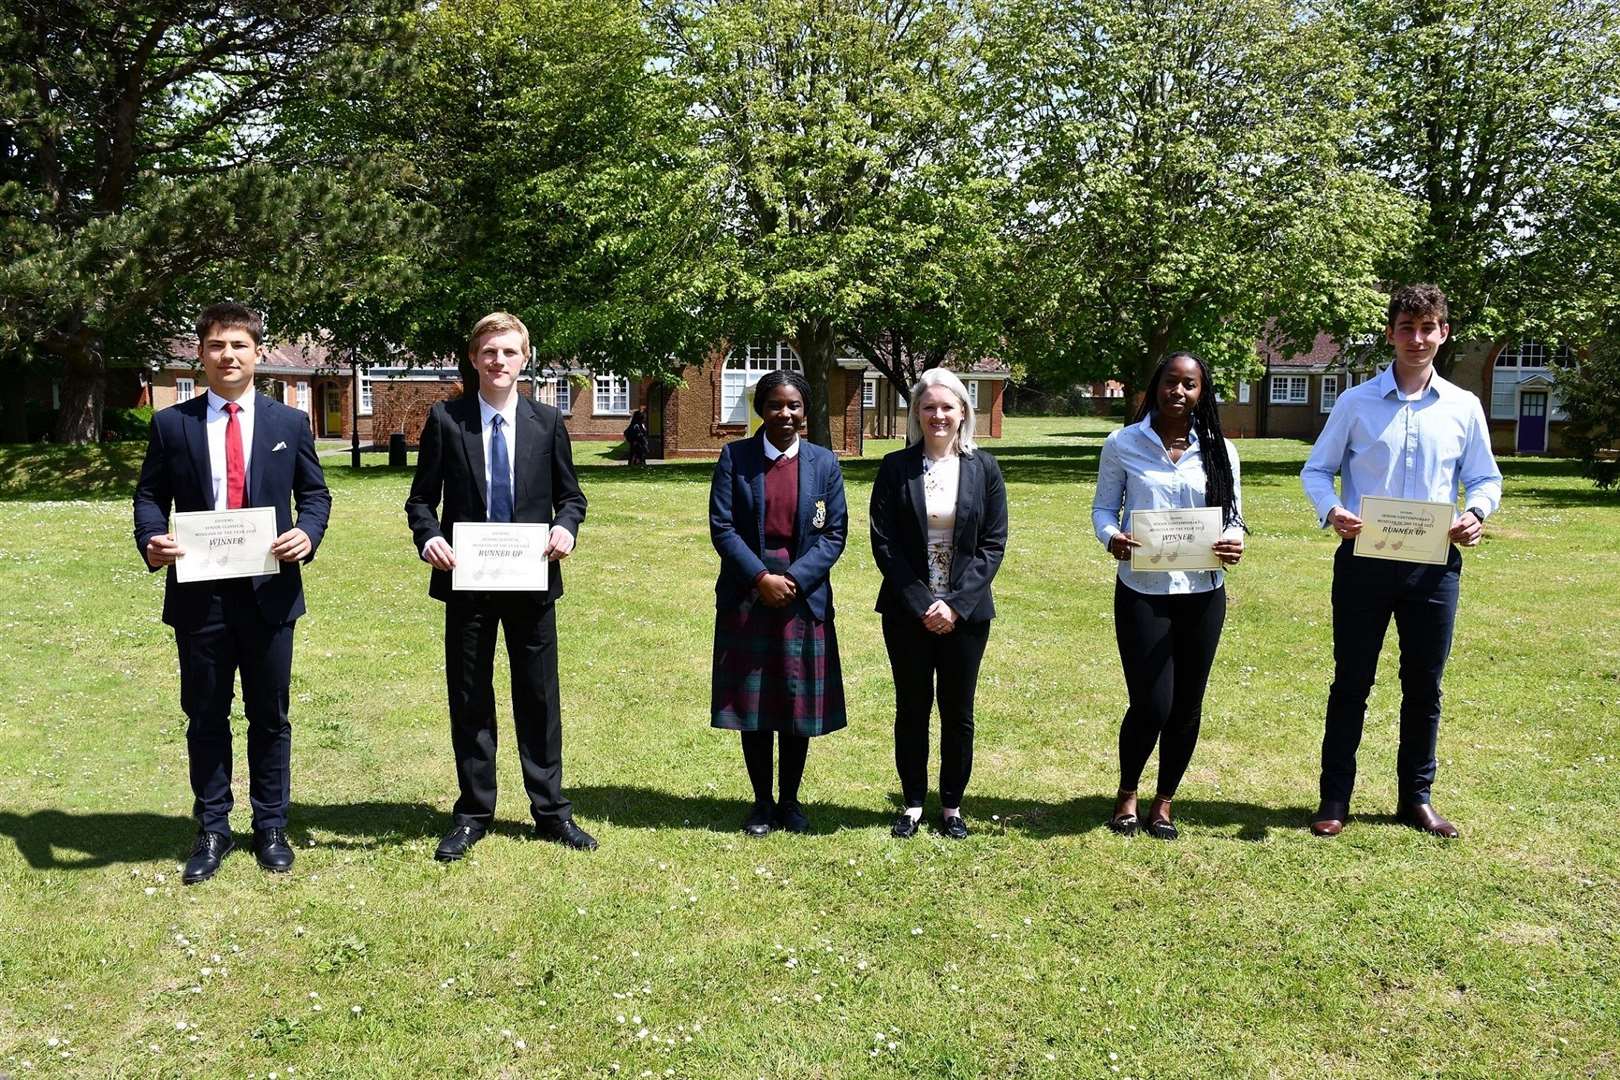 Winners and runners-up, From left: Anton Nogotkov, James Thompson, Ethel Tendo, Steph Godwin, Tisean Crichlow, and Toby Thorne. Picture: Duke of York's Royal Military School, Dover